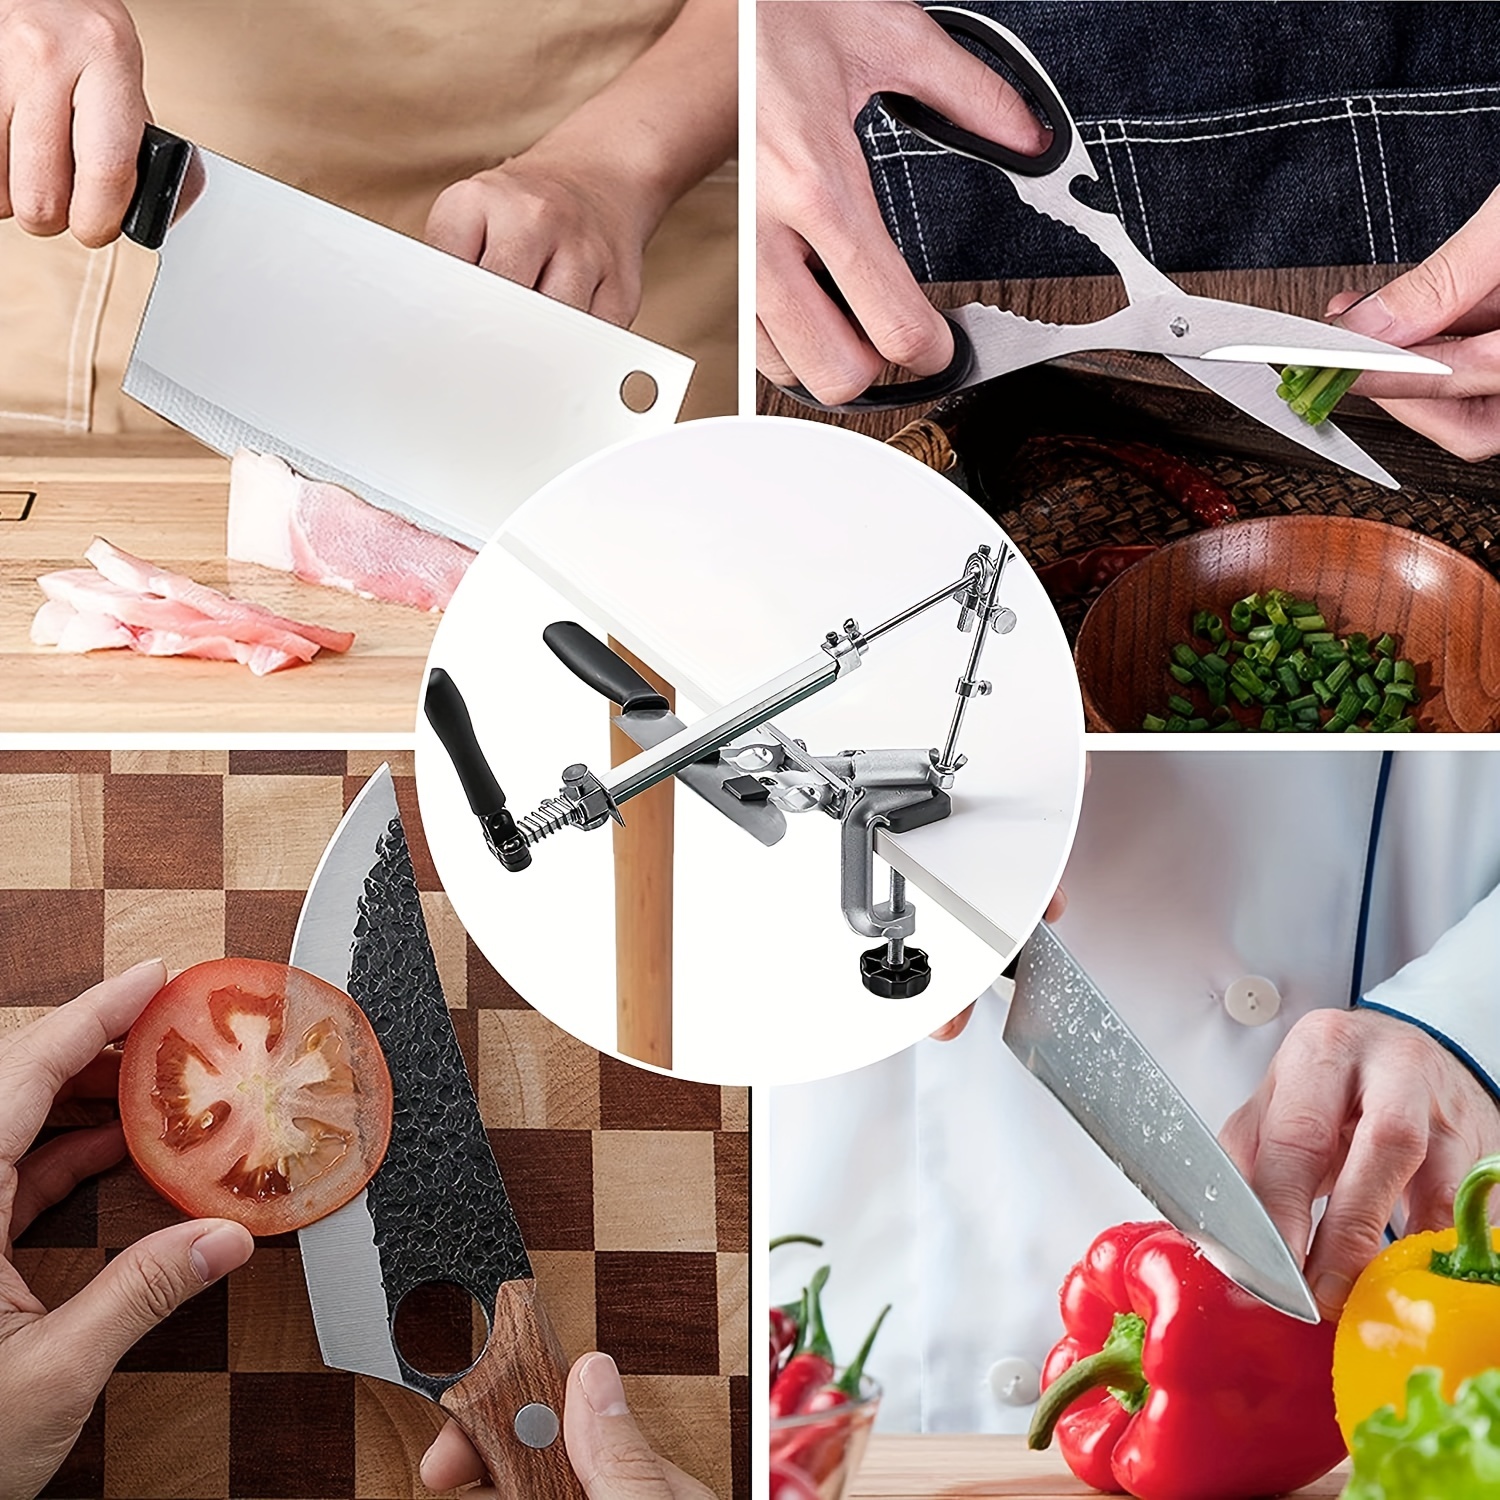 Fix-angle Knife Sharpener Kit, Kitchen Professional Sharpening System Tools for Chef Home